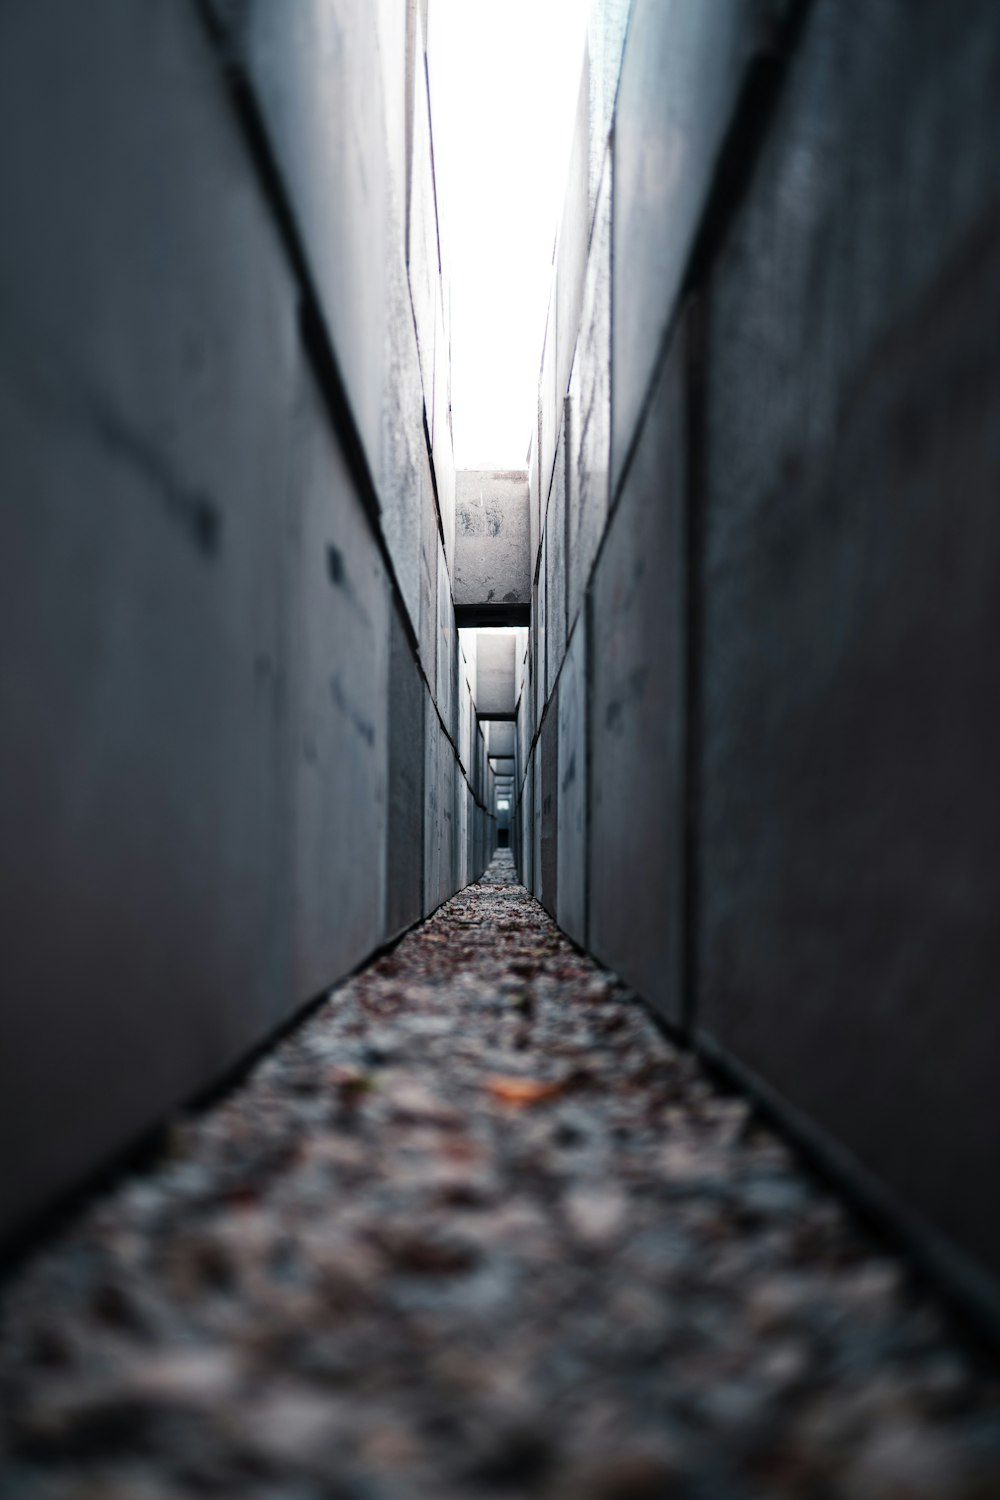 grey concrete hallway with dried leaves on the floor